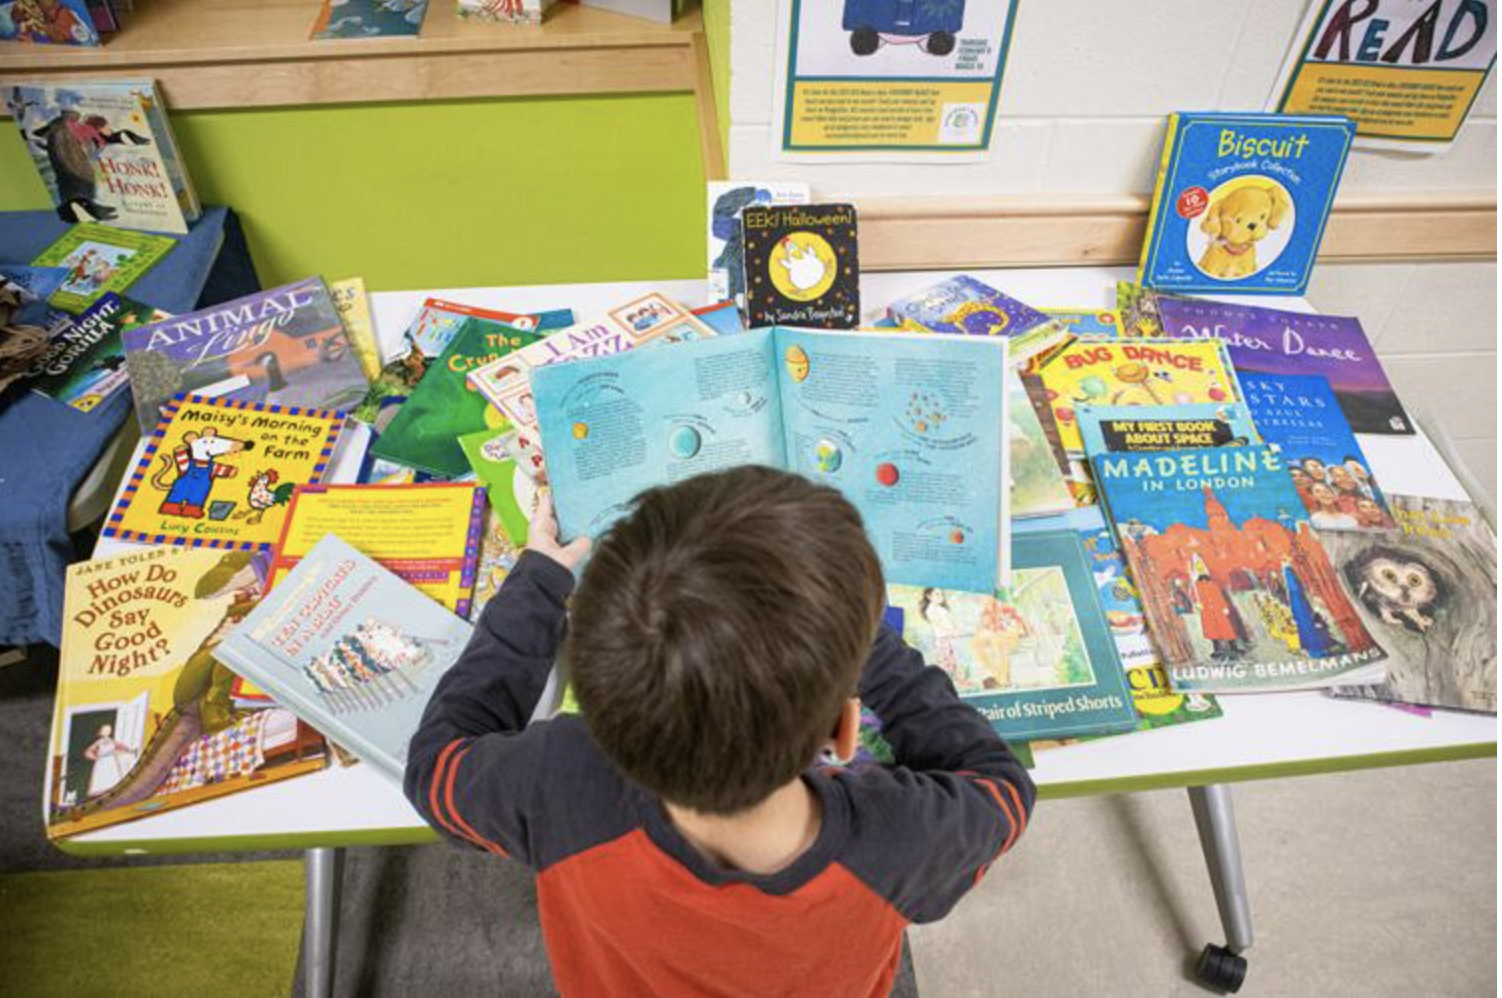  A student browses bools at the Shelburne Commuity School on Feb. 9.  Photo by Aylin Kursat 